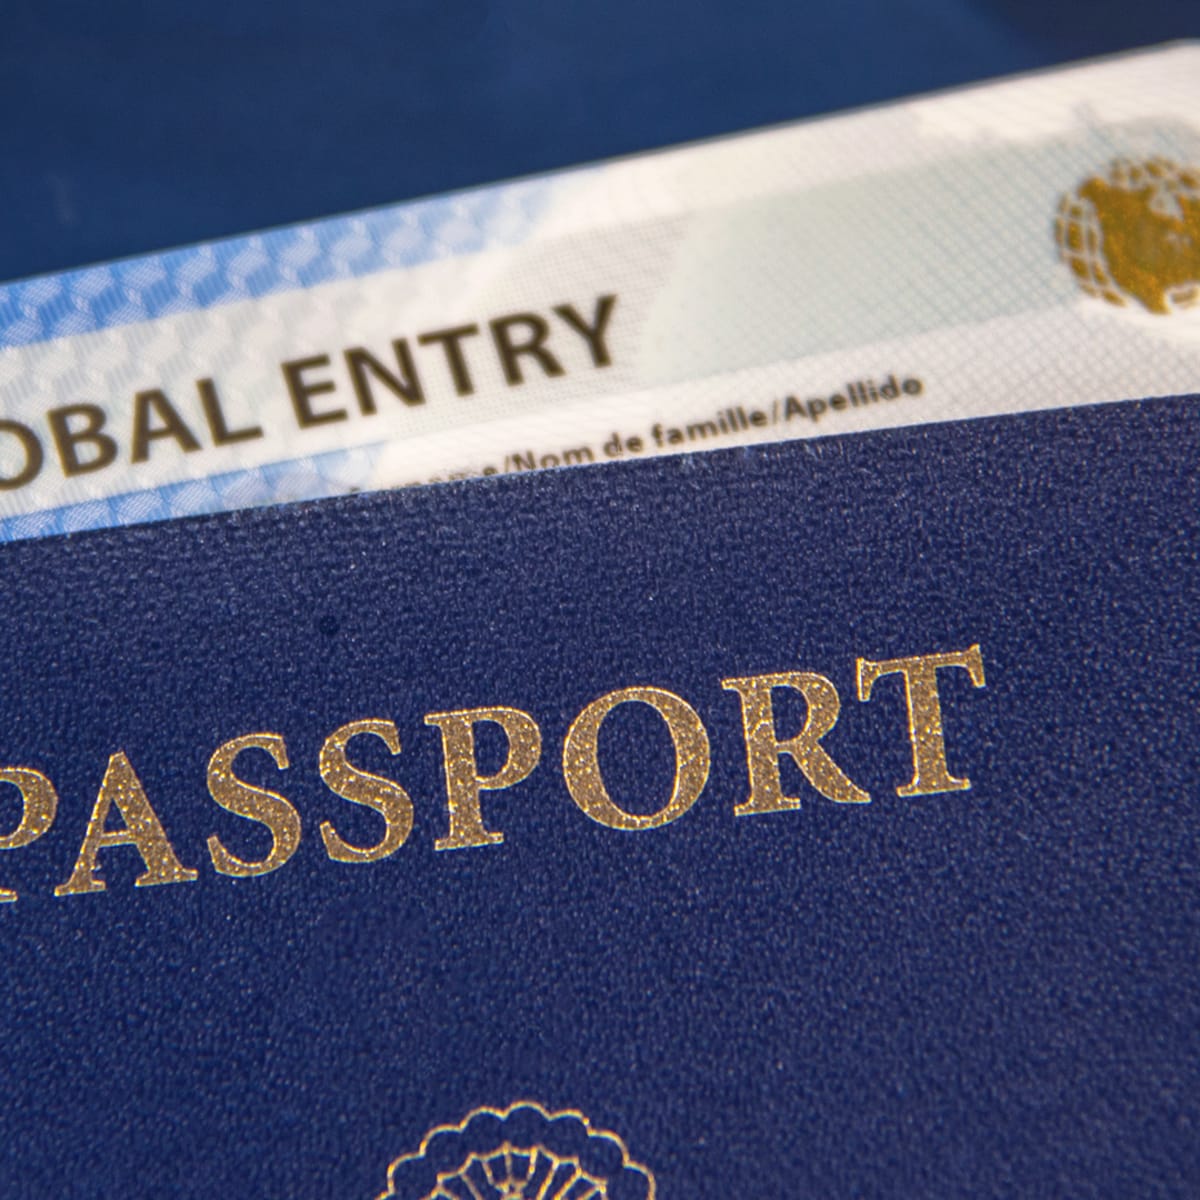 There's a New Hack that Lets You Get Global Entry Quicker - TheStreet